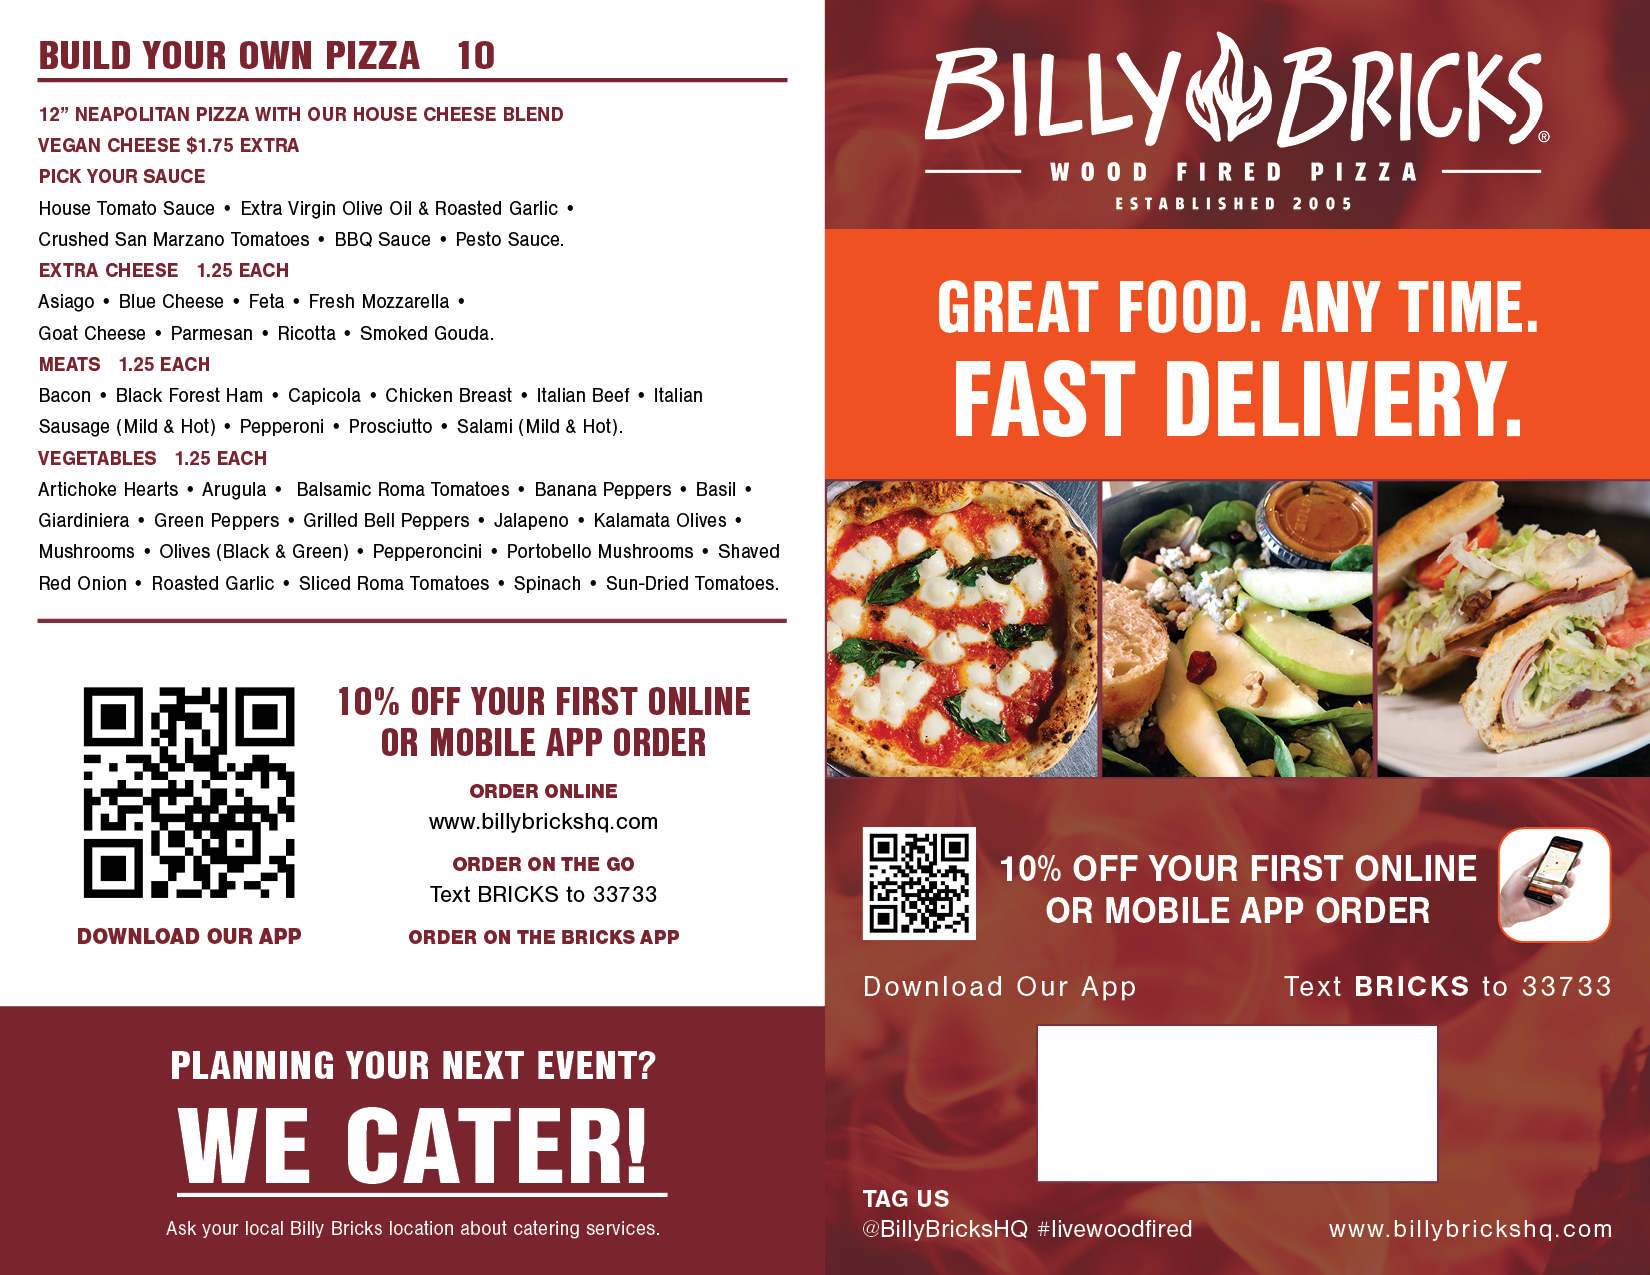 A delivery menu designed for Billy Bricks Pizza after they underwent a rebranding.